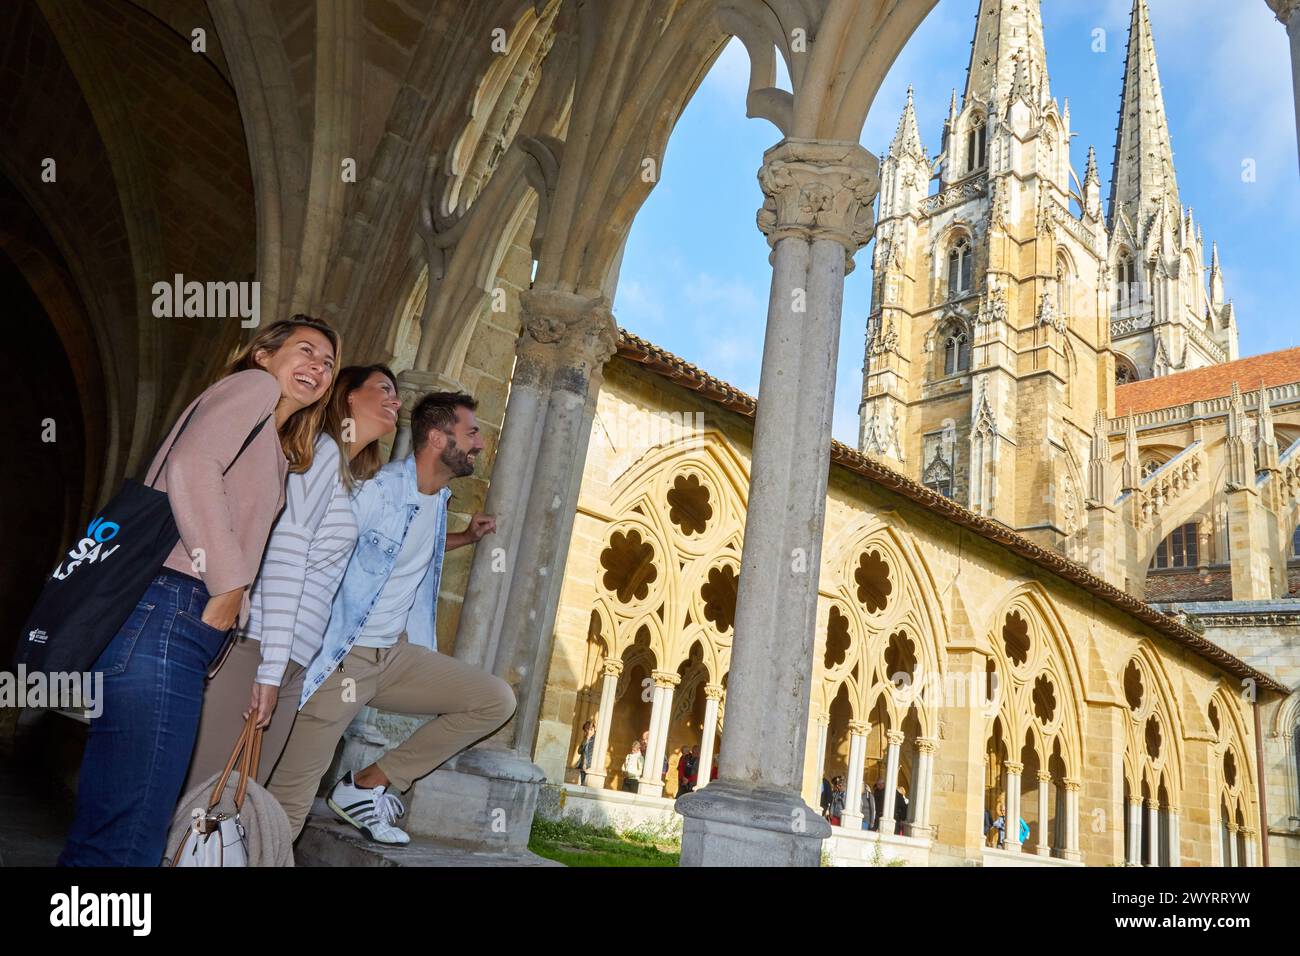 Guide with tourists, Tour, Saint Mary of Bayonne Cathedral, Bayonne, Aquitaine, Pyrenees Atlantiques, France, Europe. Stock Photo